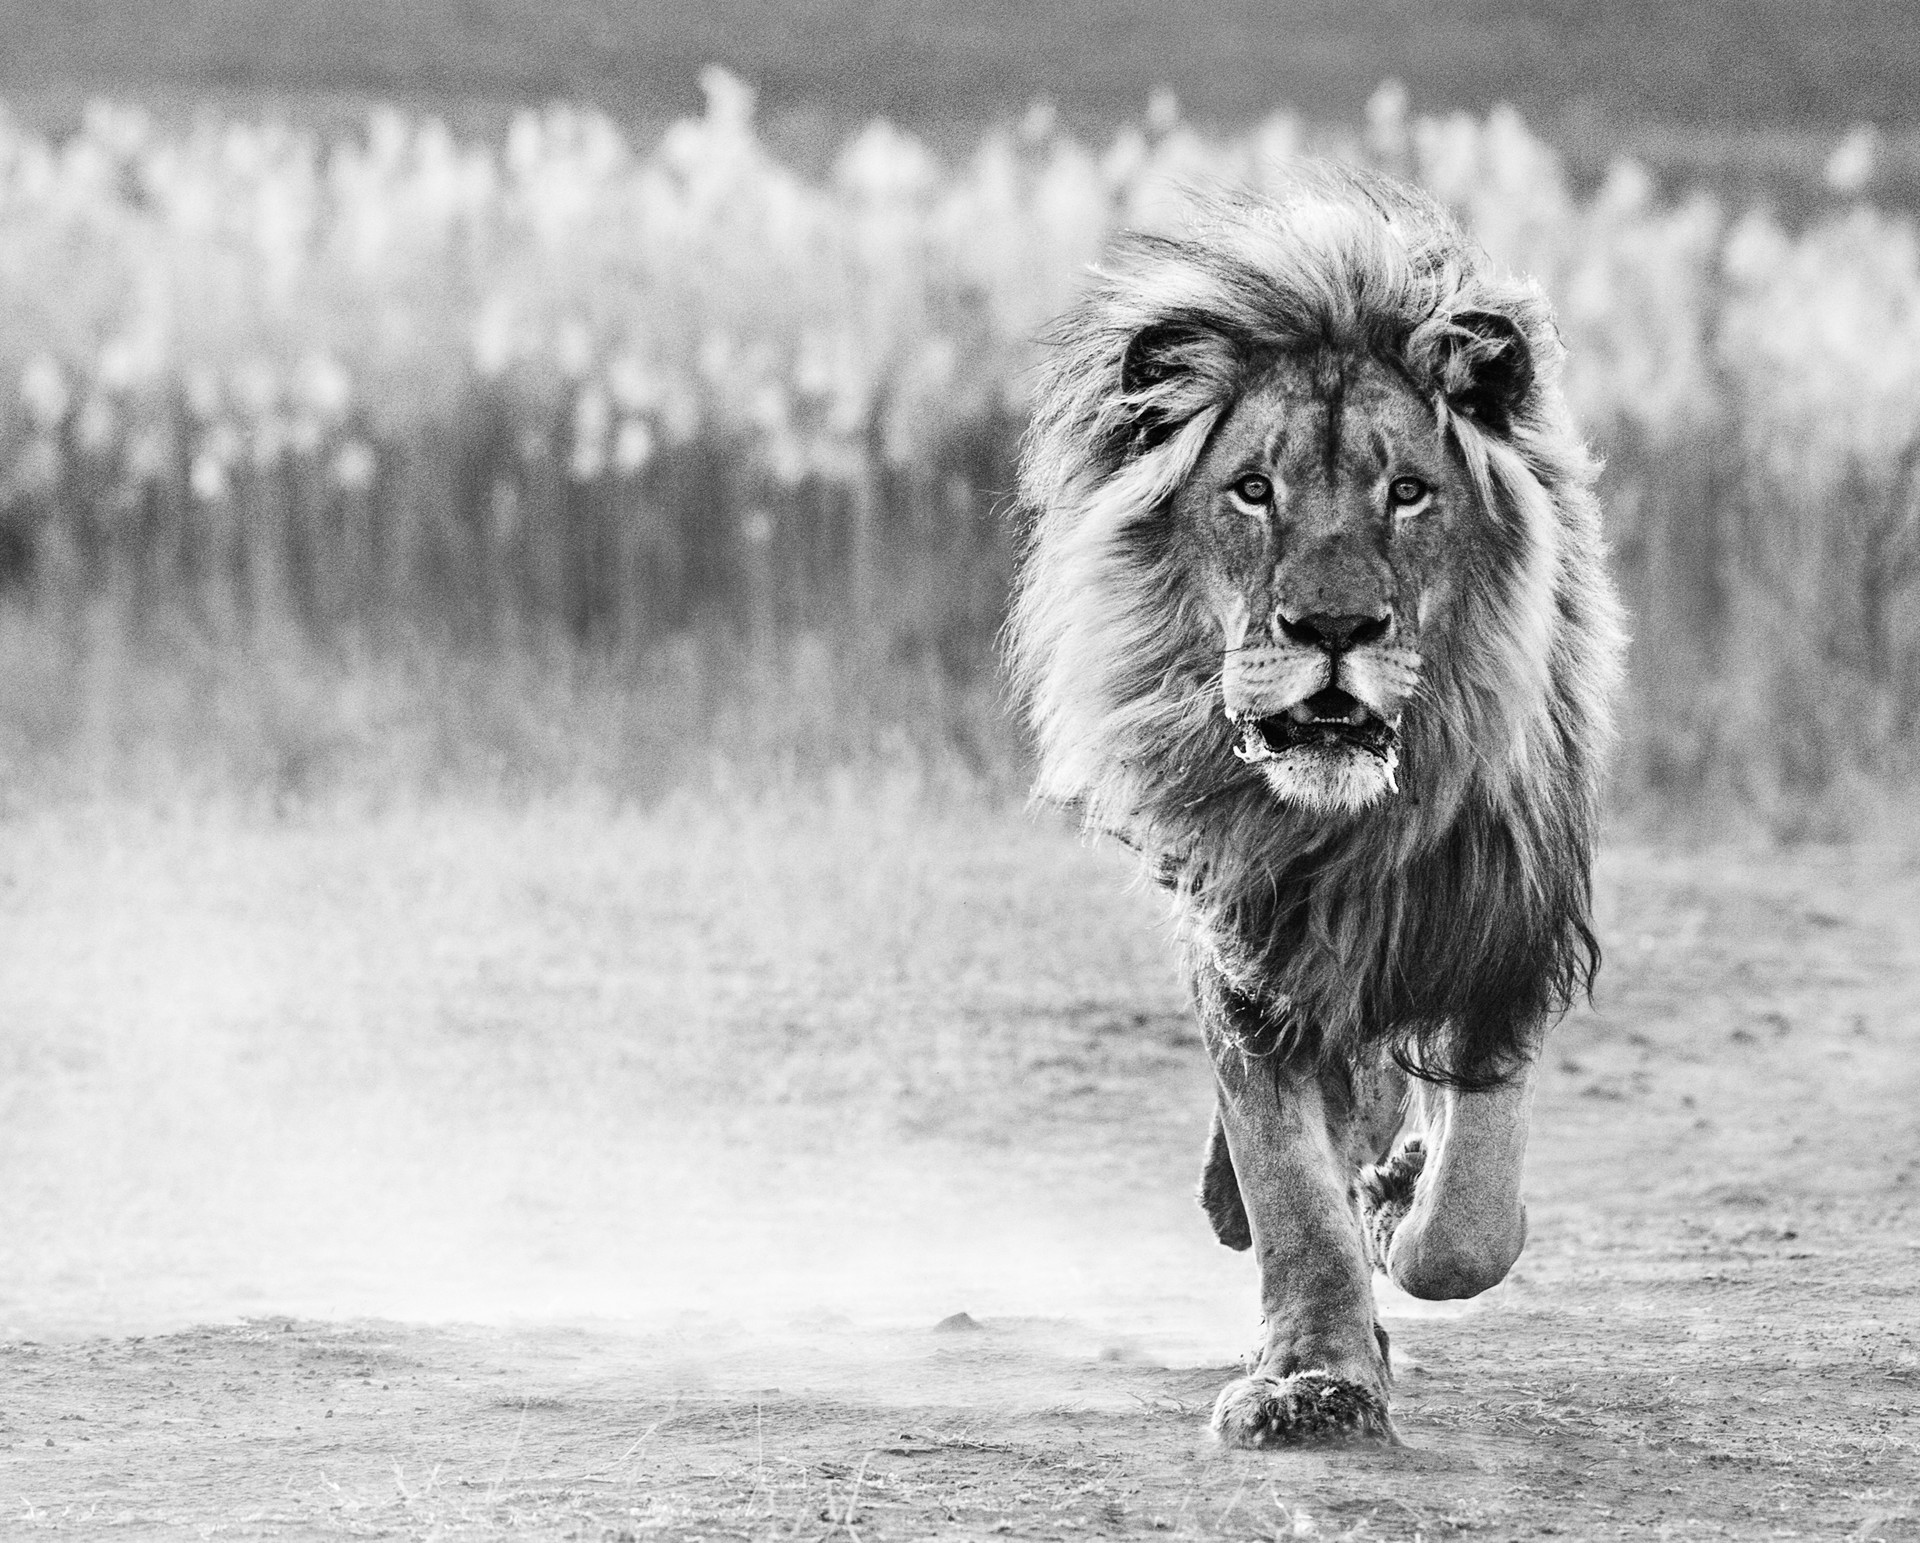 One Foot on the Ground by David Yarrow